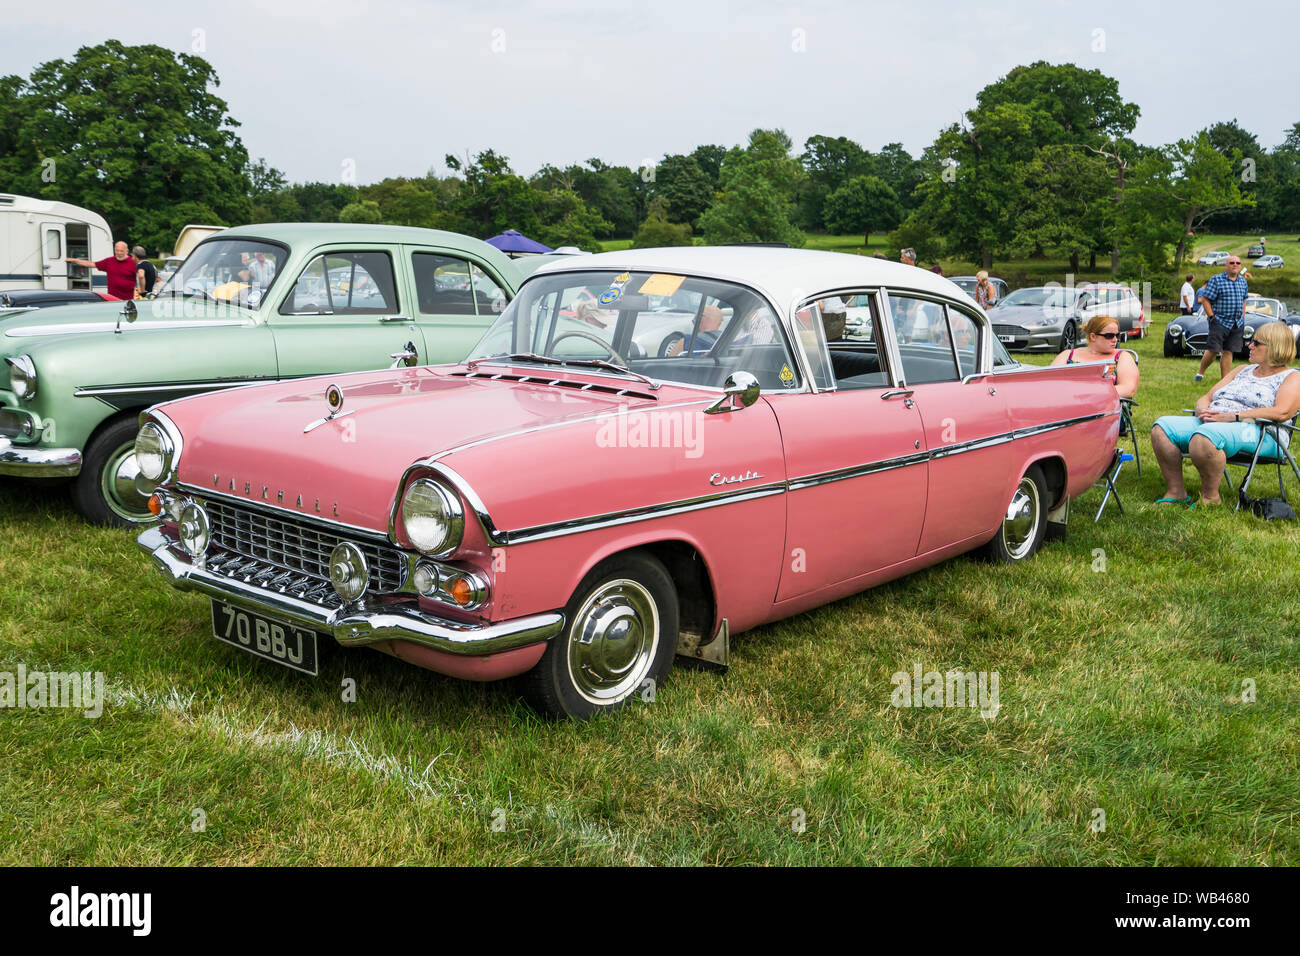 Pink Vauxhall Cresta at The Helmingham Festival of Classic & Sports Cars 2019 Stock Photo